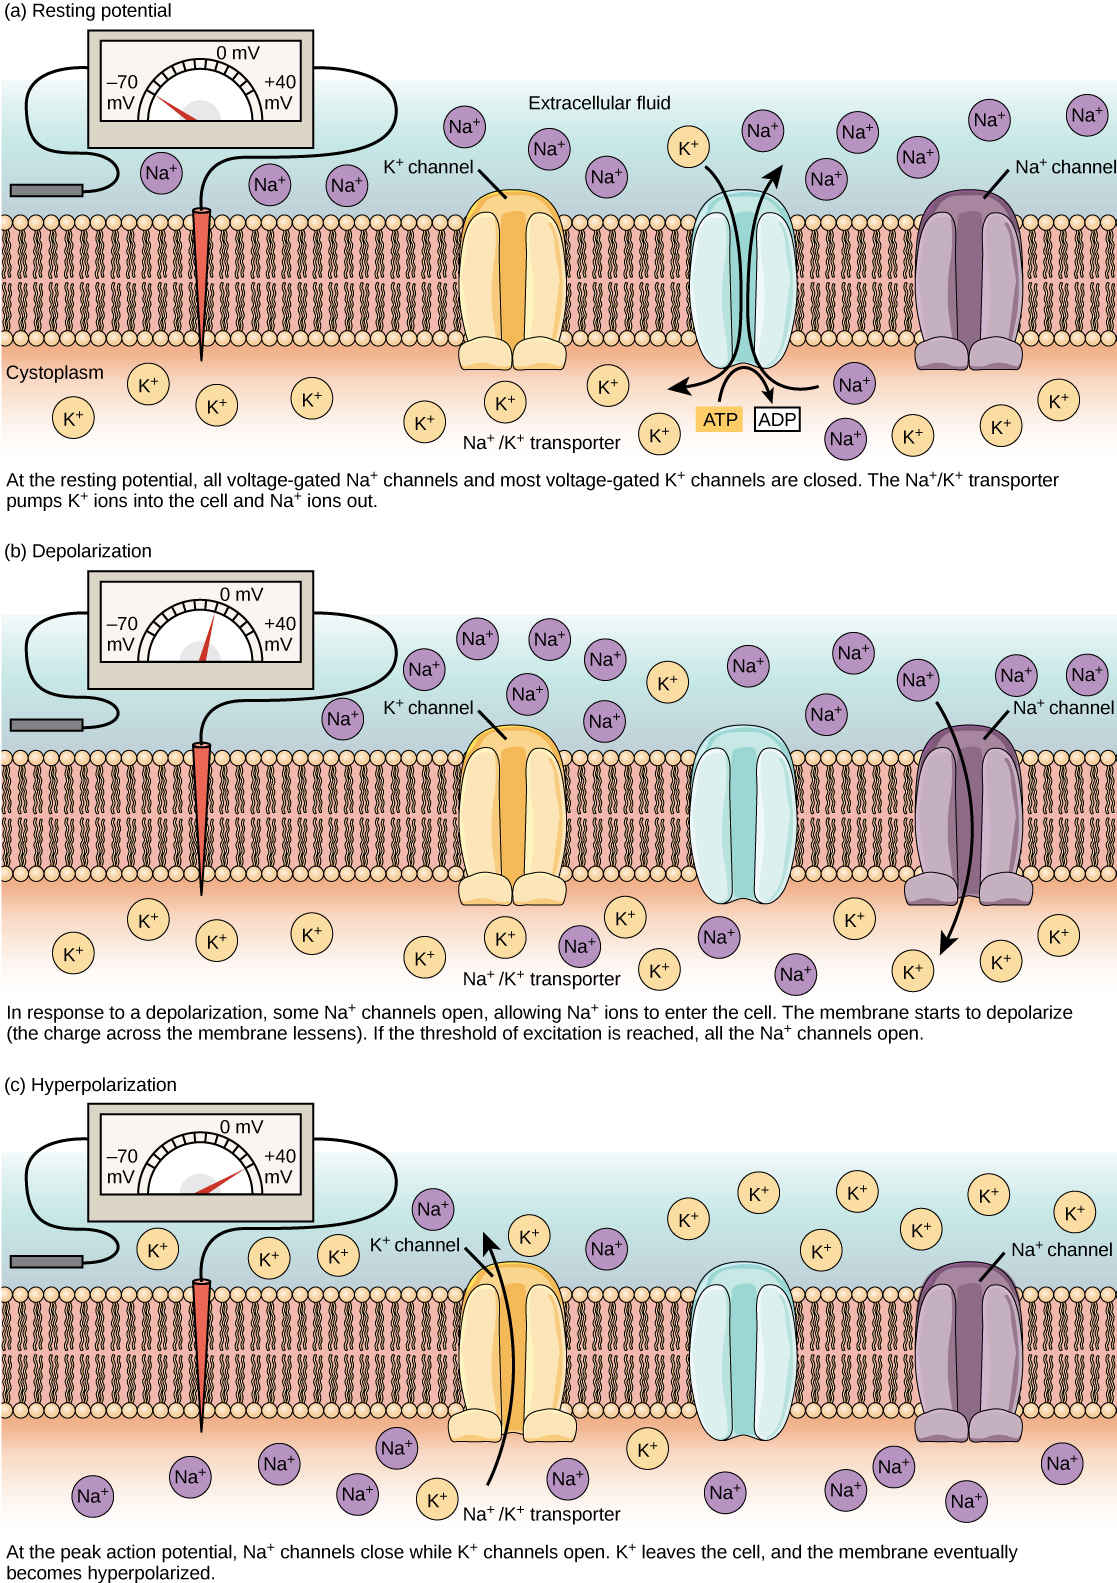 Voltage-gated ion channels open in response to changes in membrane potential.